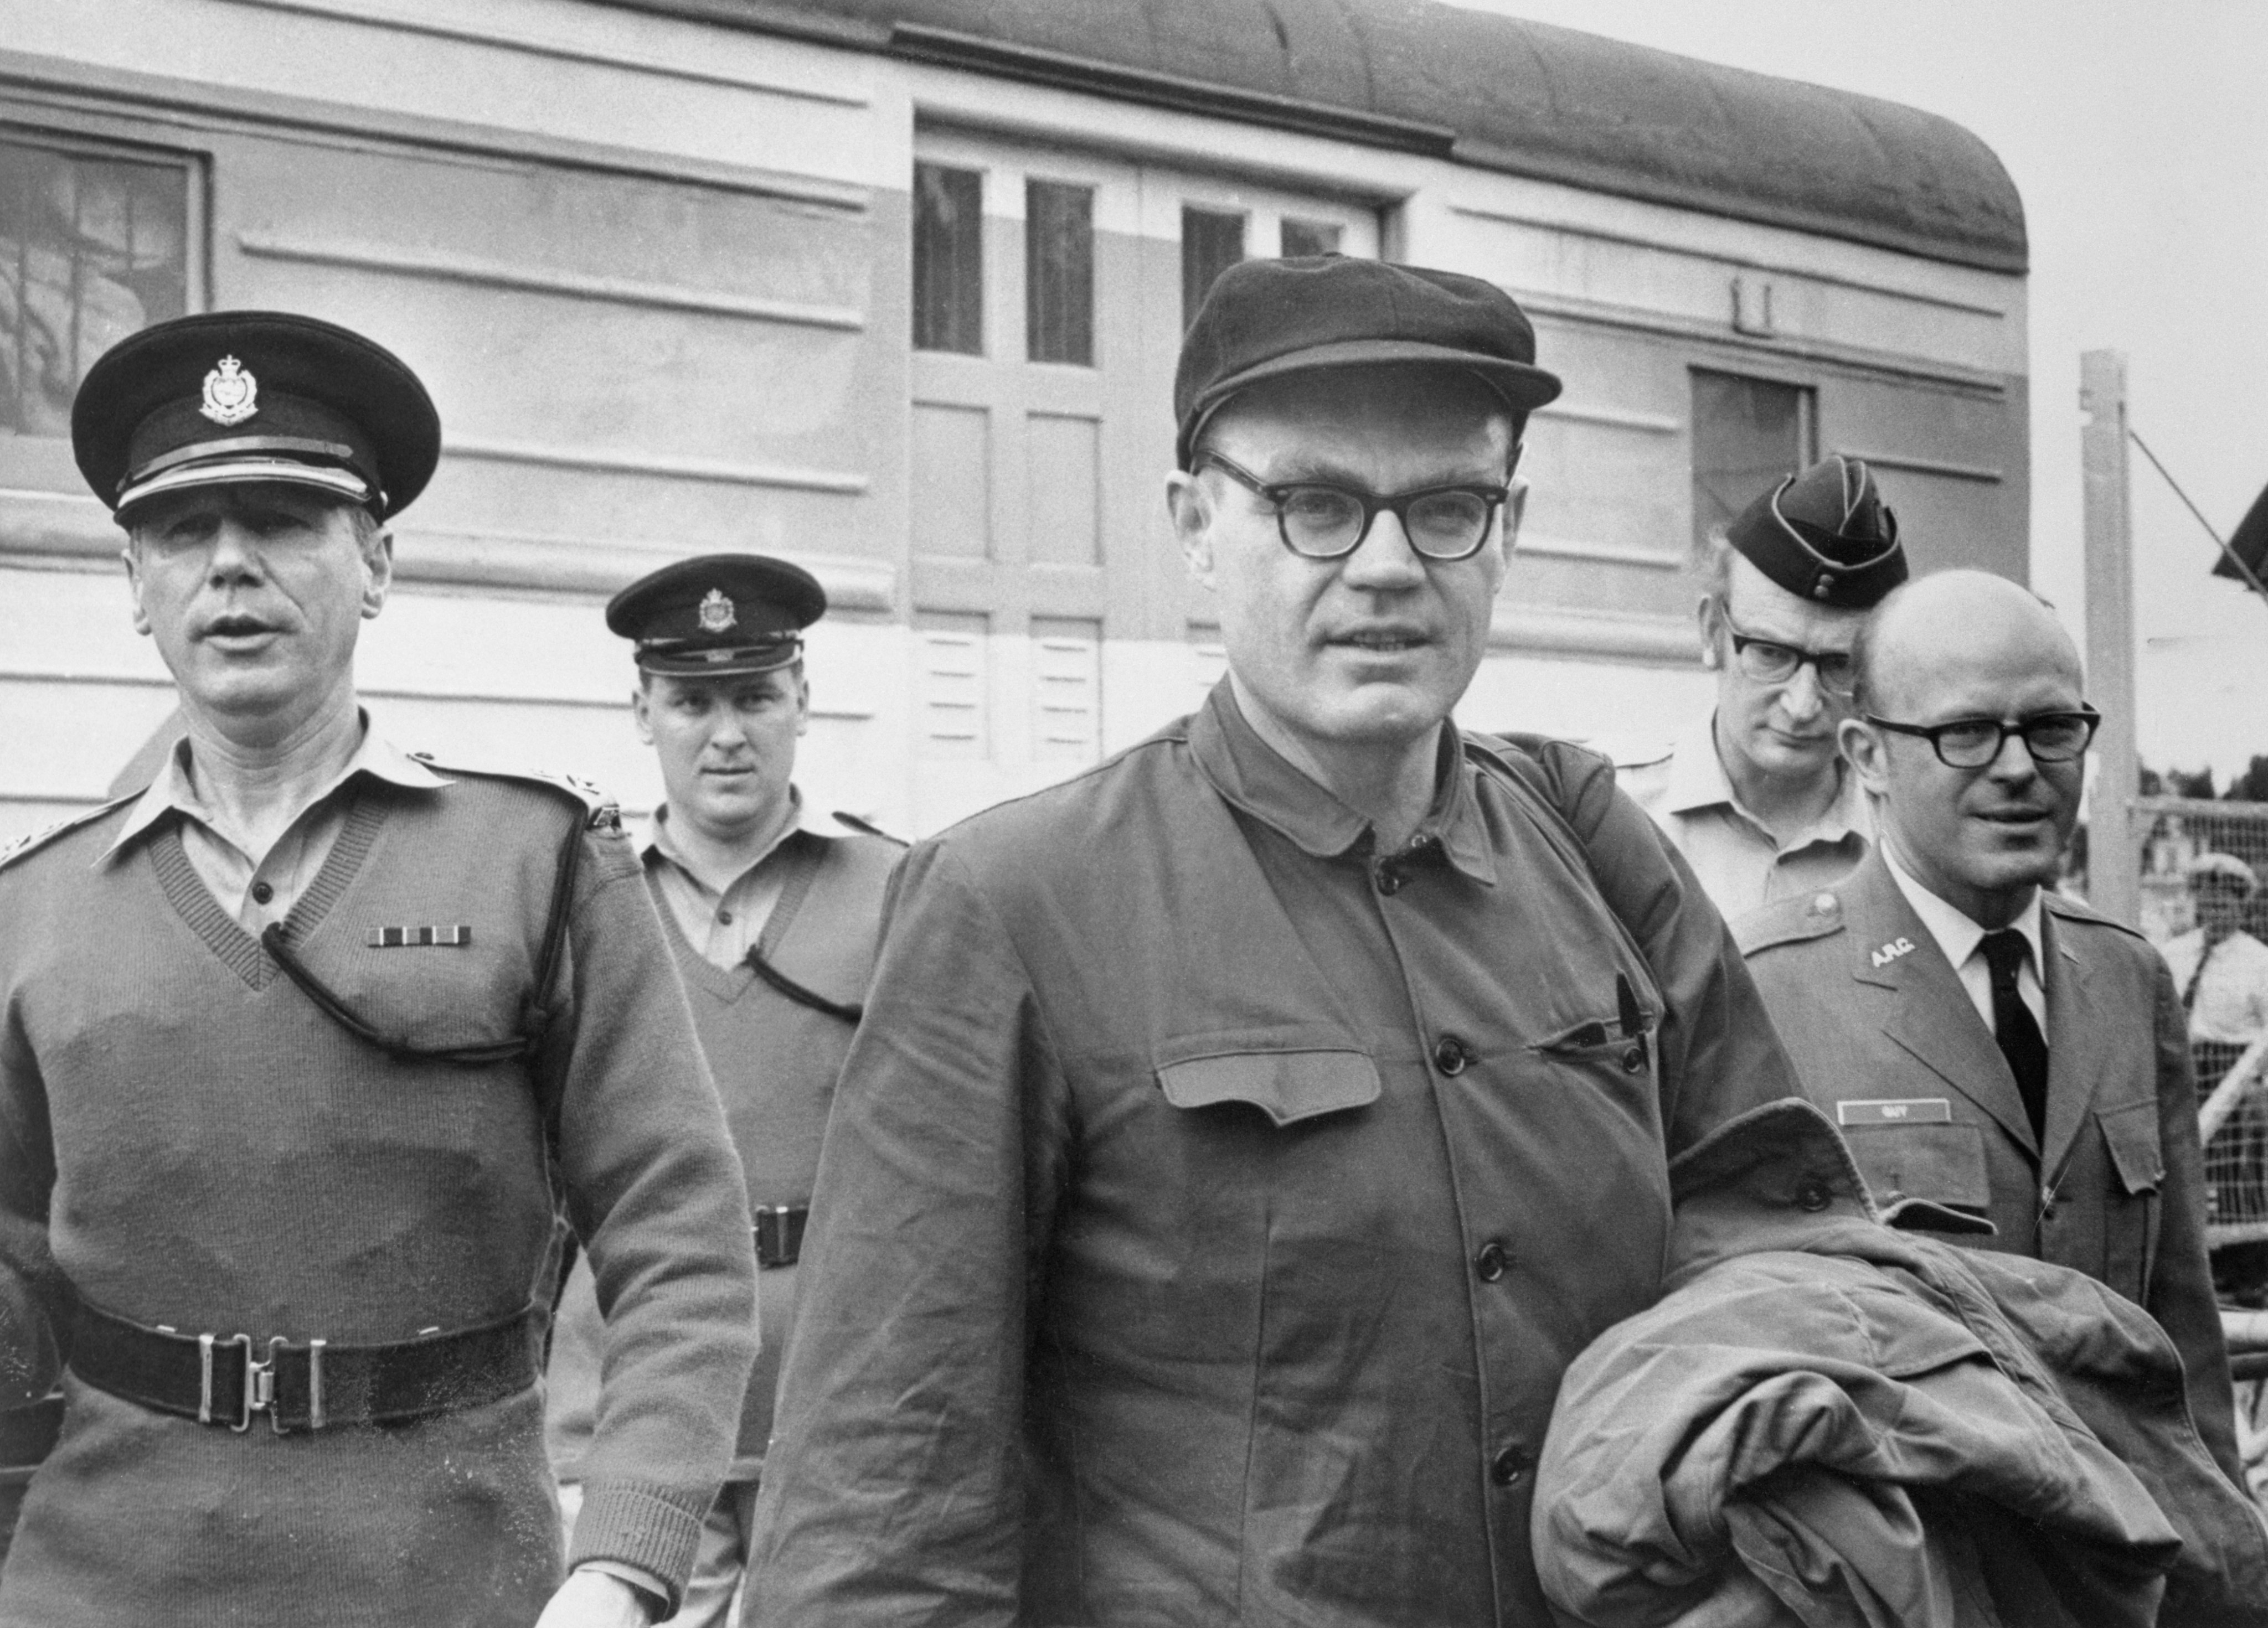 John Downey (right), a CIA agent imprisoned in China for more than 20 years, crosses from China into Hong Kong on March 12, 1973. The US government had long denied he was a CIA spy. Photo: Getty Images